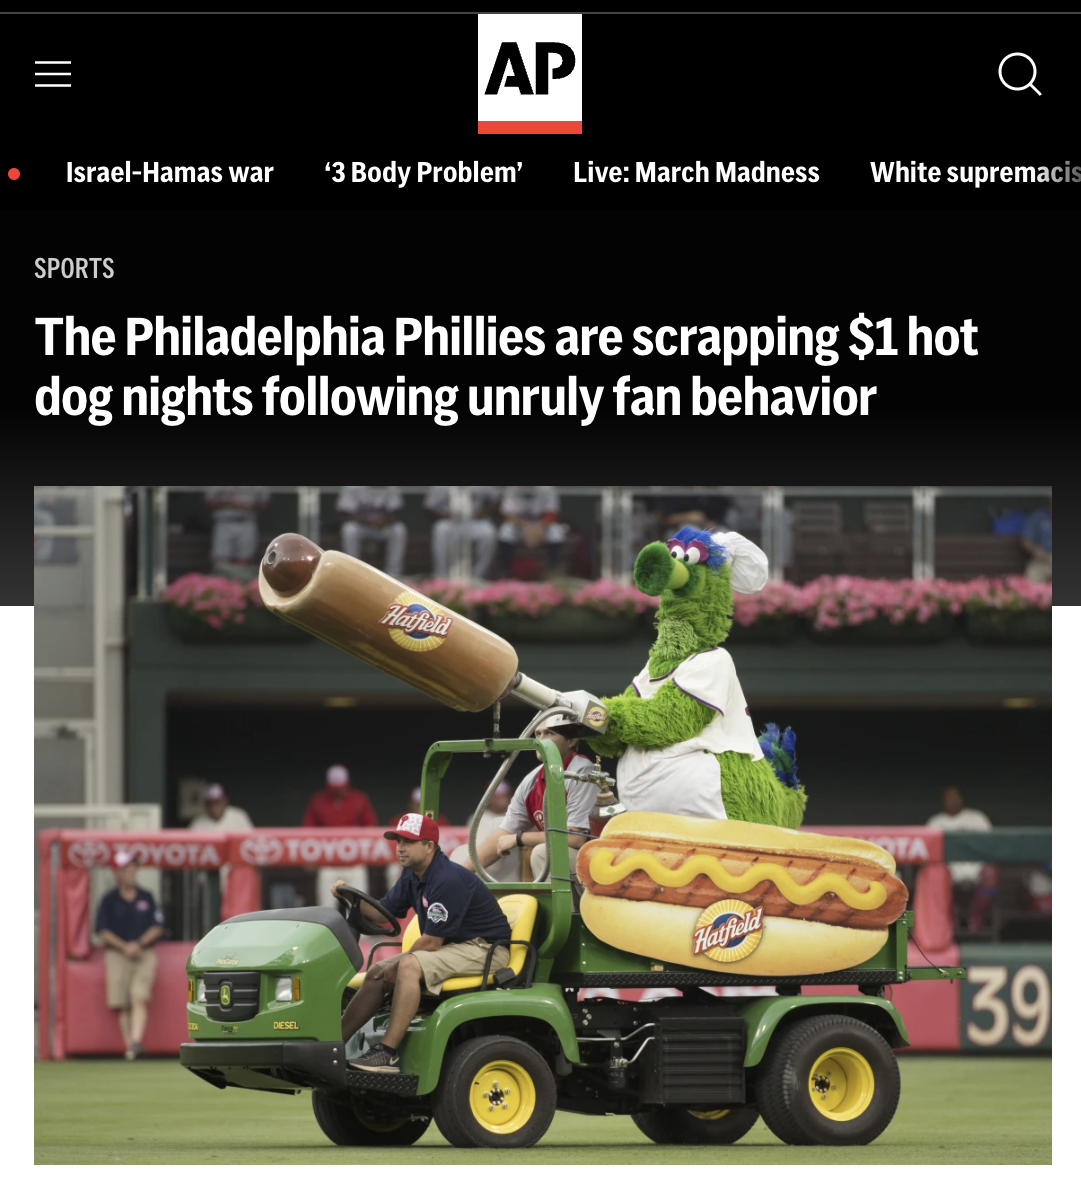 vehicle - Ap IsraelHamas war '3 Body Problem' Live March Madness White supremacis Sports The Philadelphia Phillies are scrapping $1 hot dog nights ing unruly fan behavior Cavoyota, Go Toyota 39